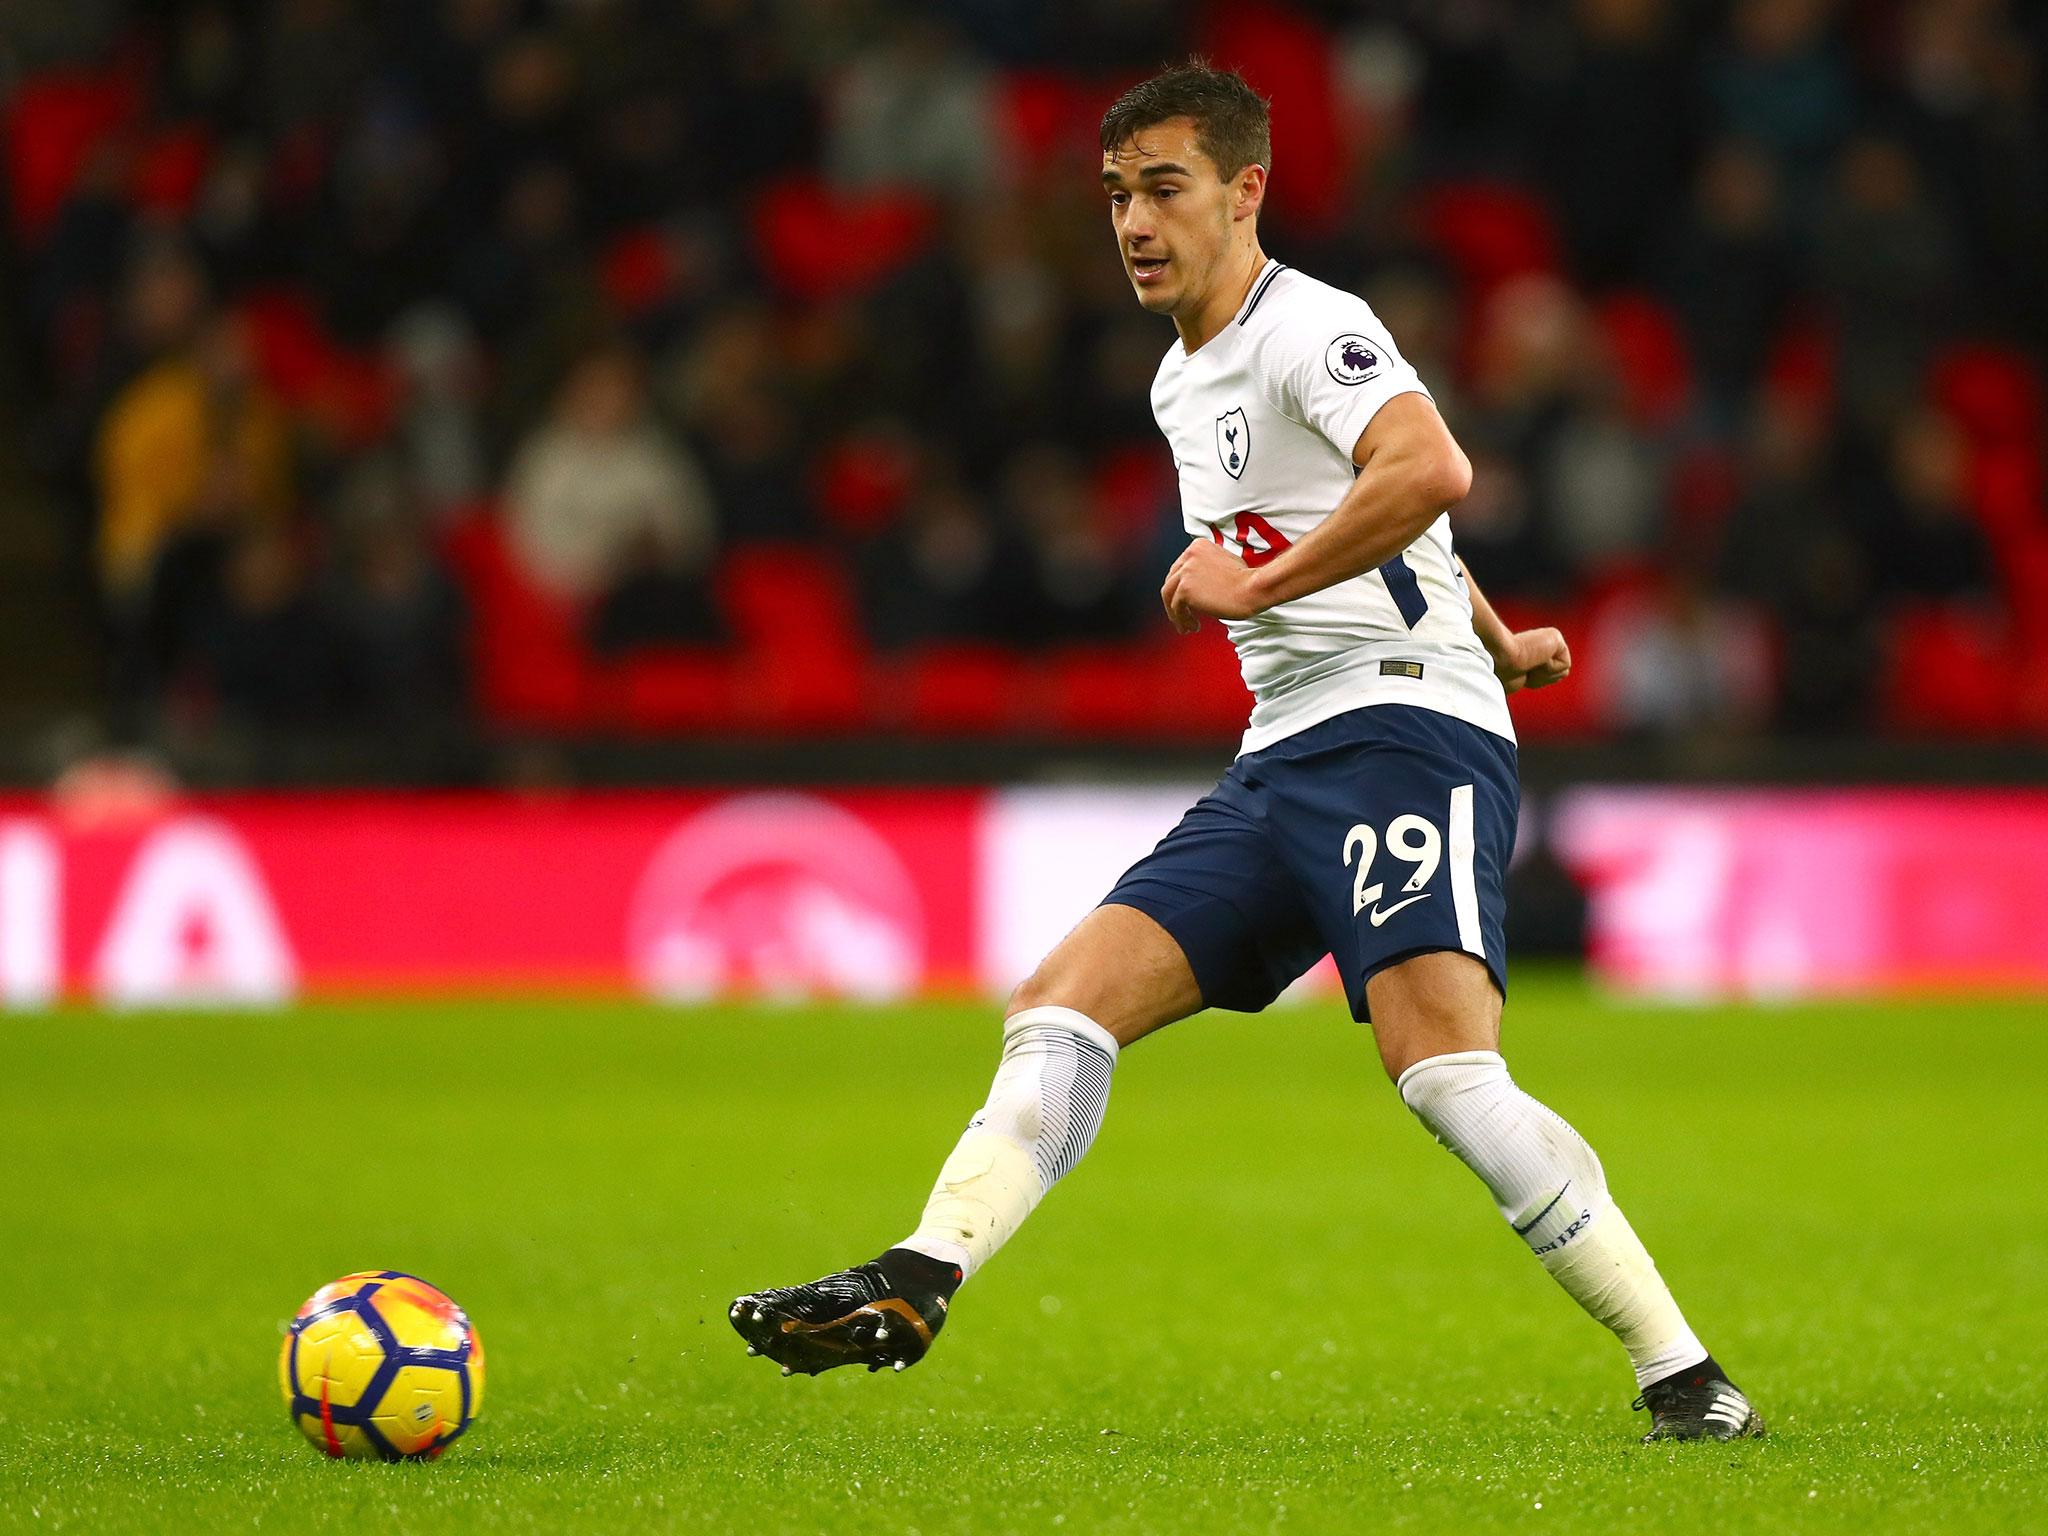 The youngster wants Tottenham to make a point against City this weekend